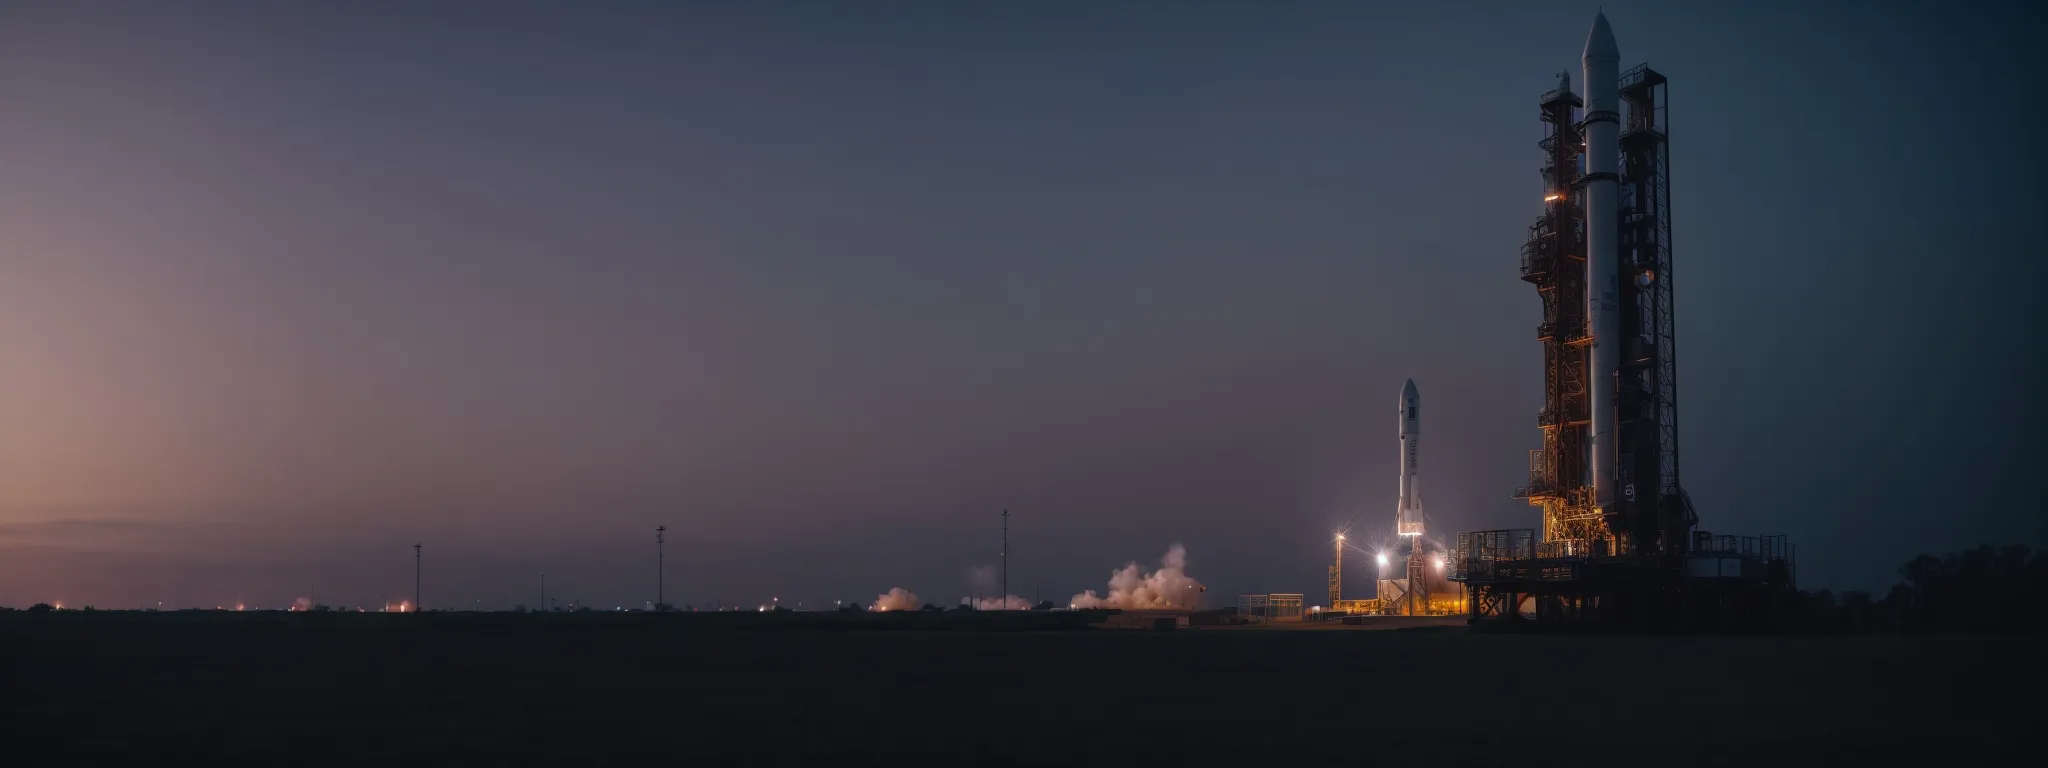 a rocket on a launchpad against a pre-dawn sky, symbolizing the strategic preparation for a website launch.